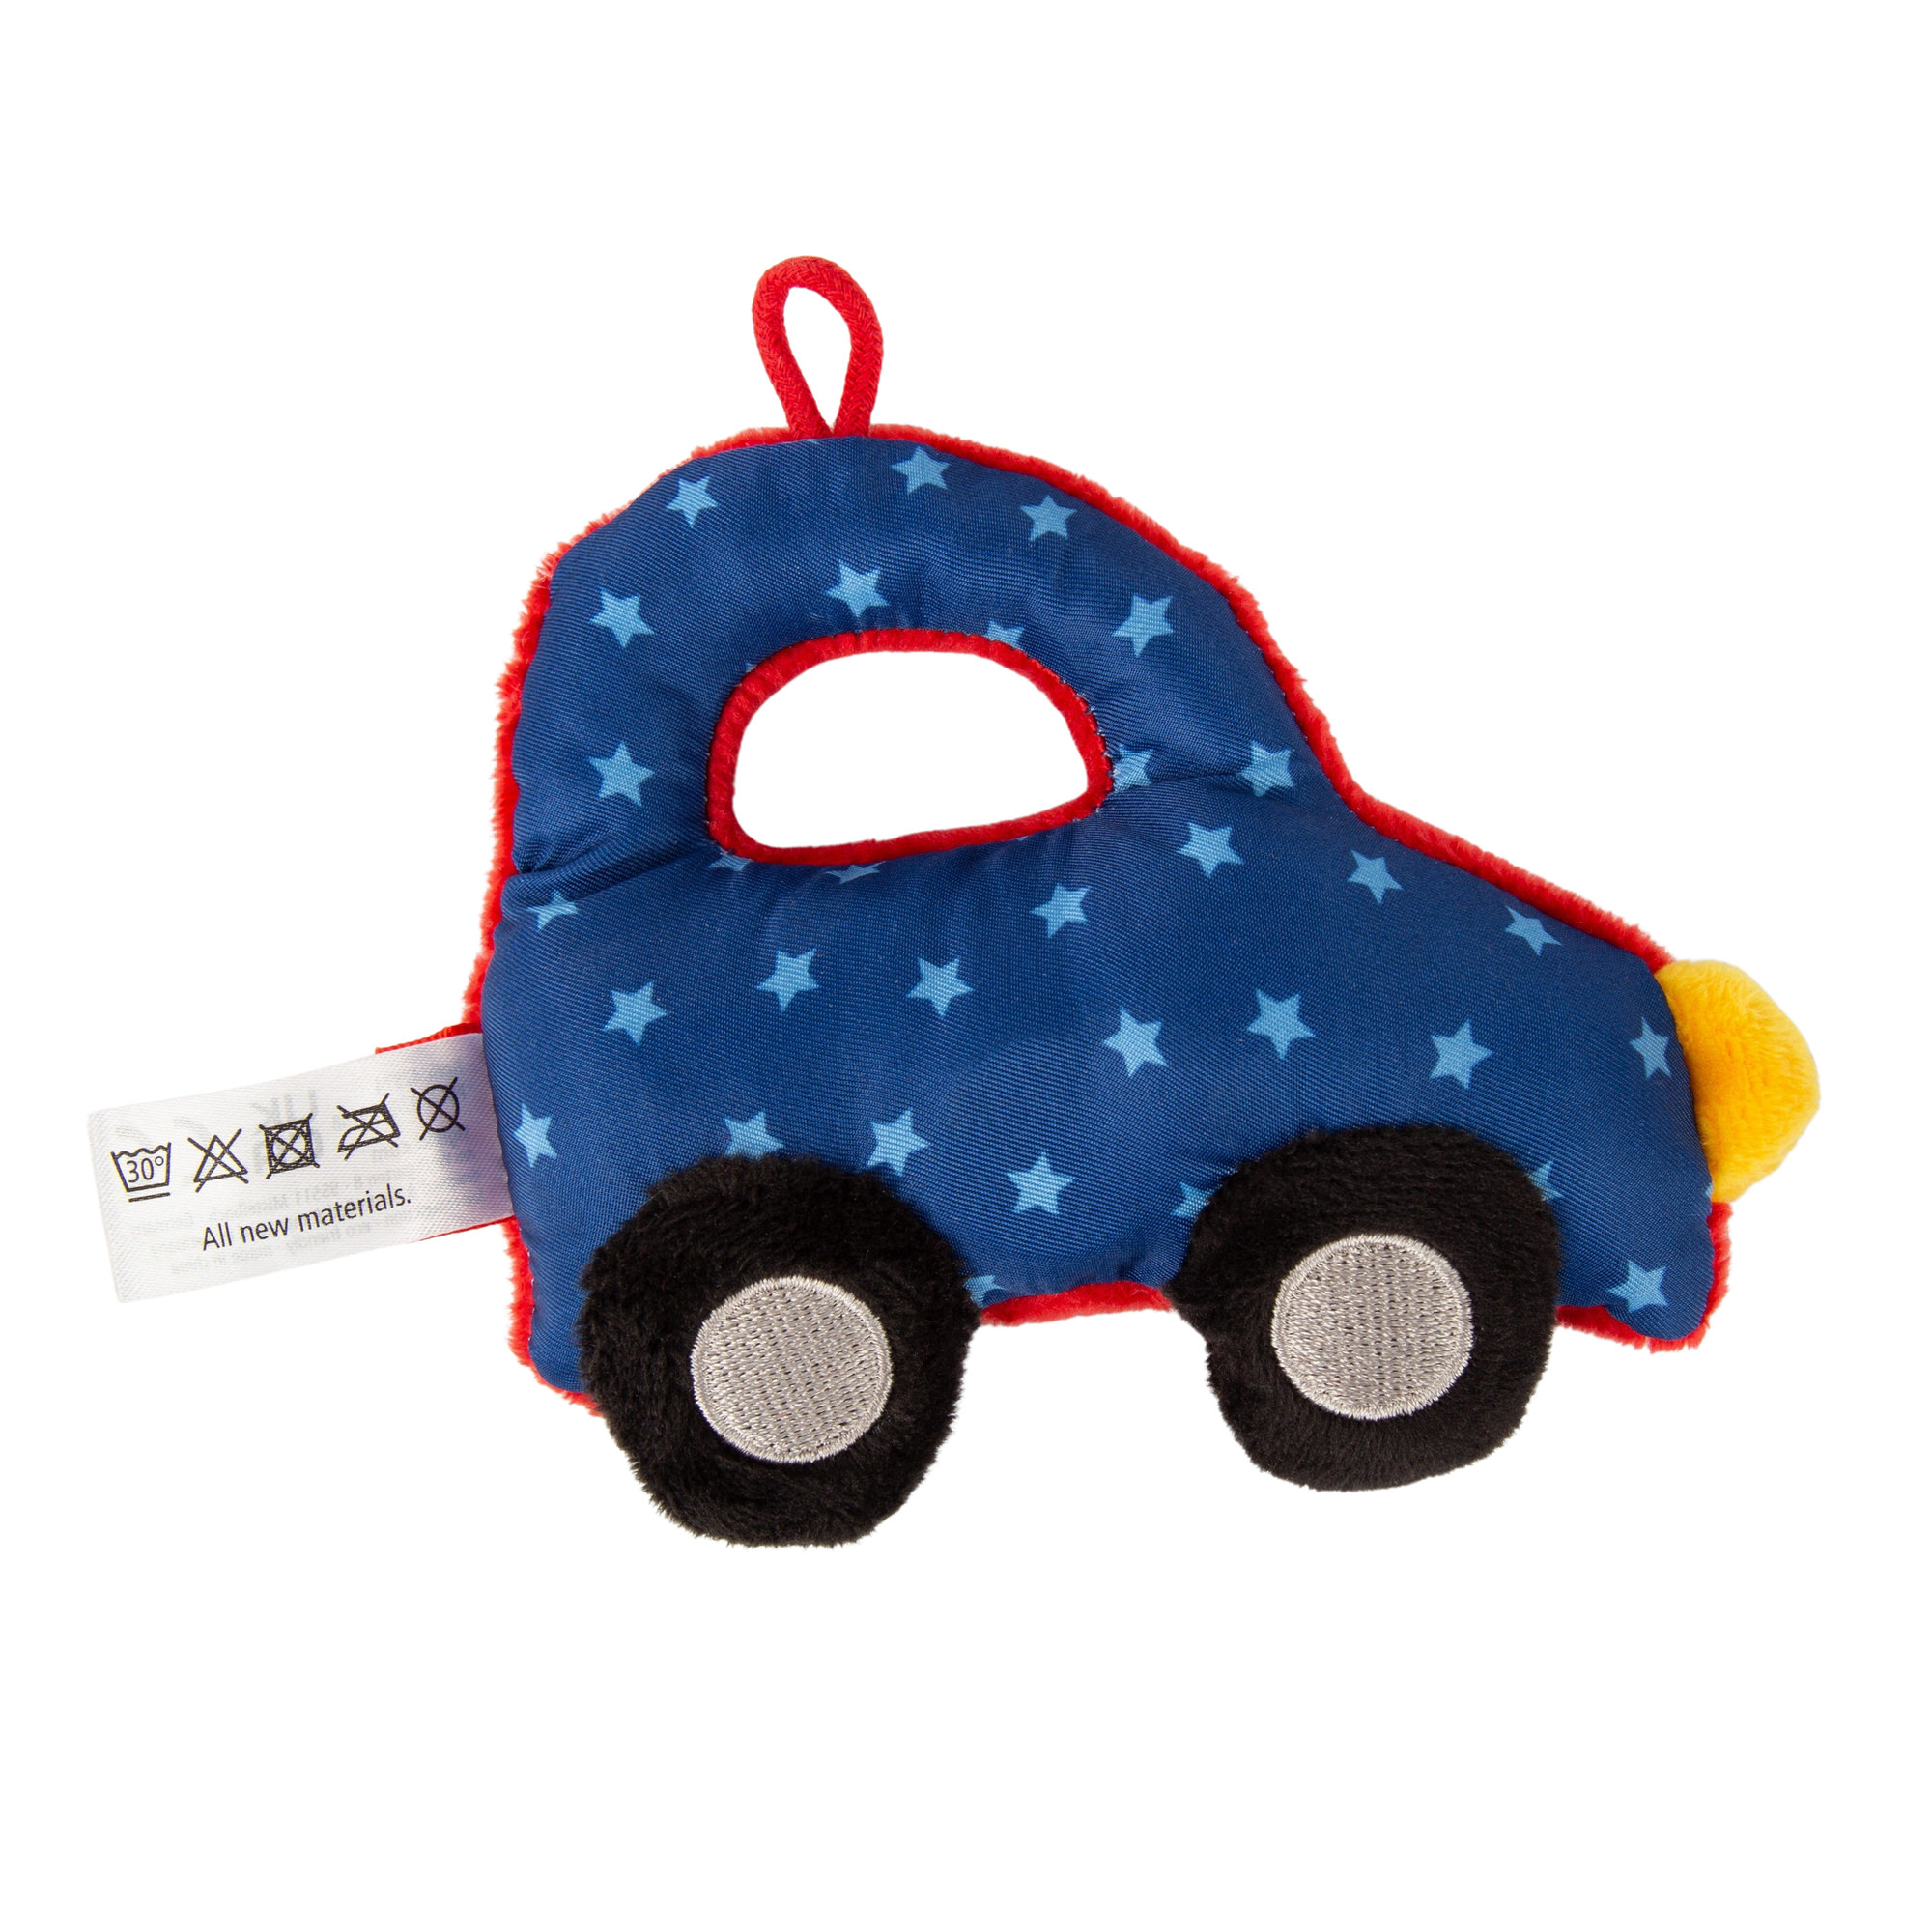 Baby grasp soft toy car, red